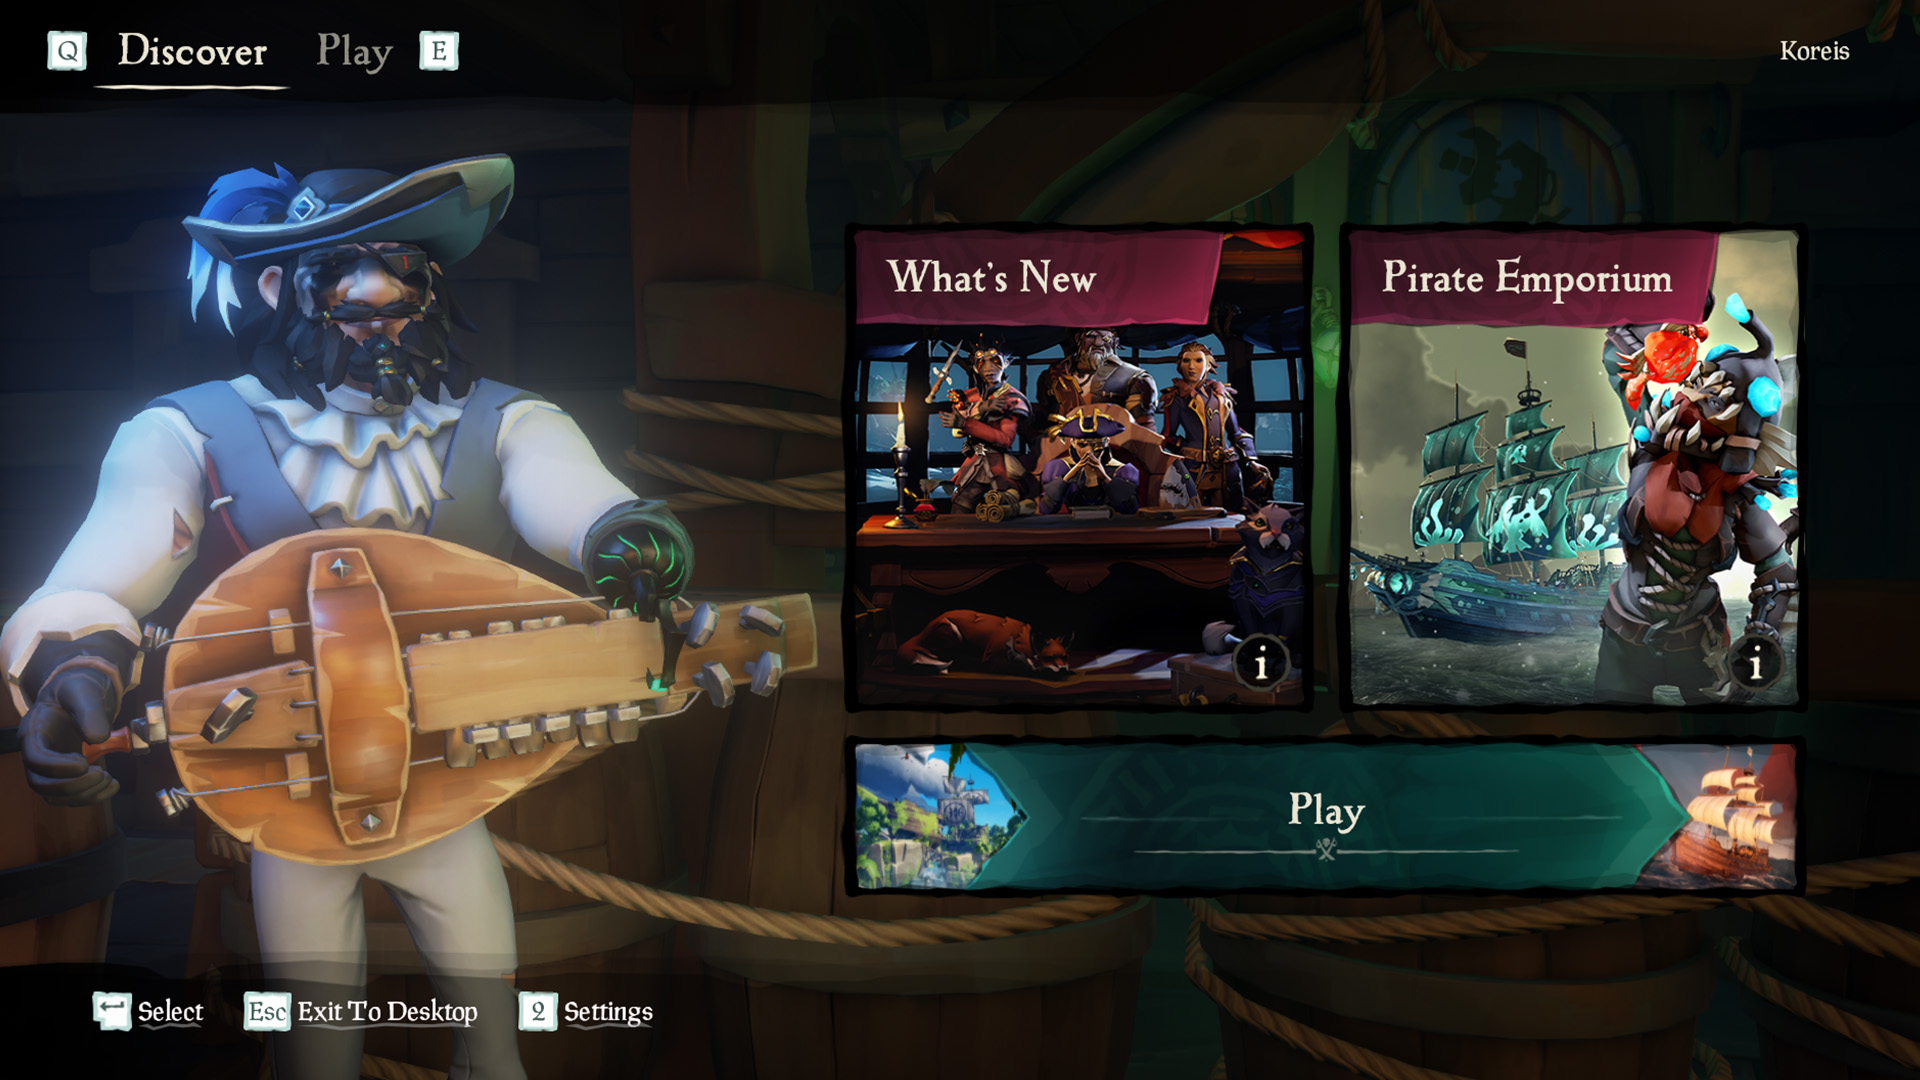 The season 7 main menu in Sea of Thieves, offering a chance to play or purchase items